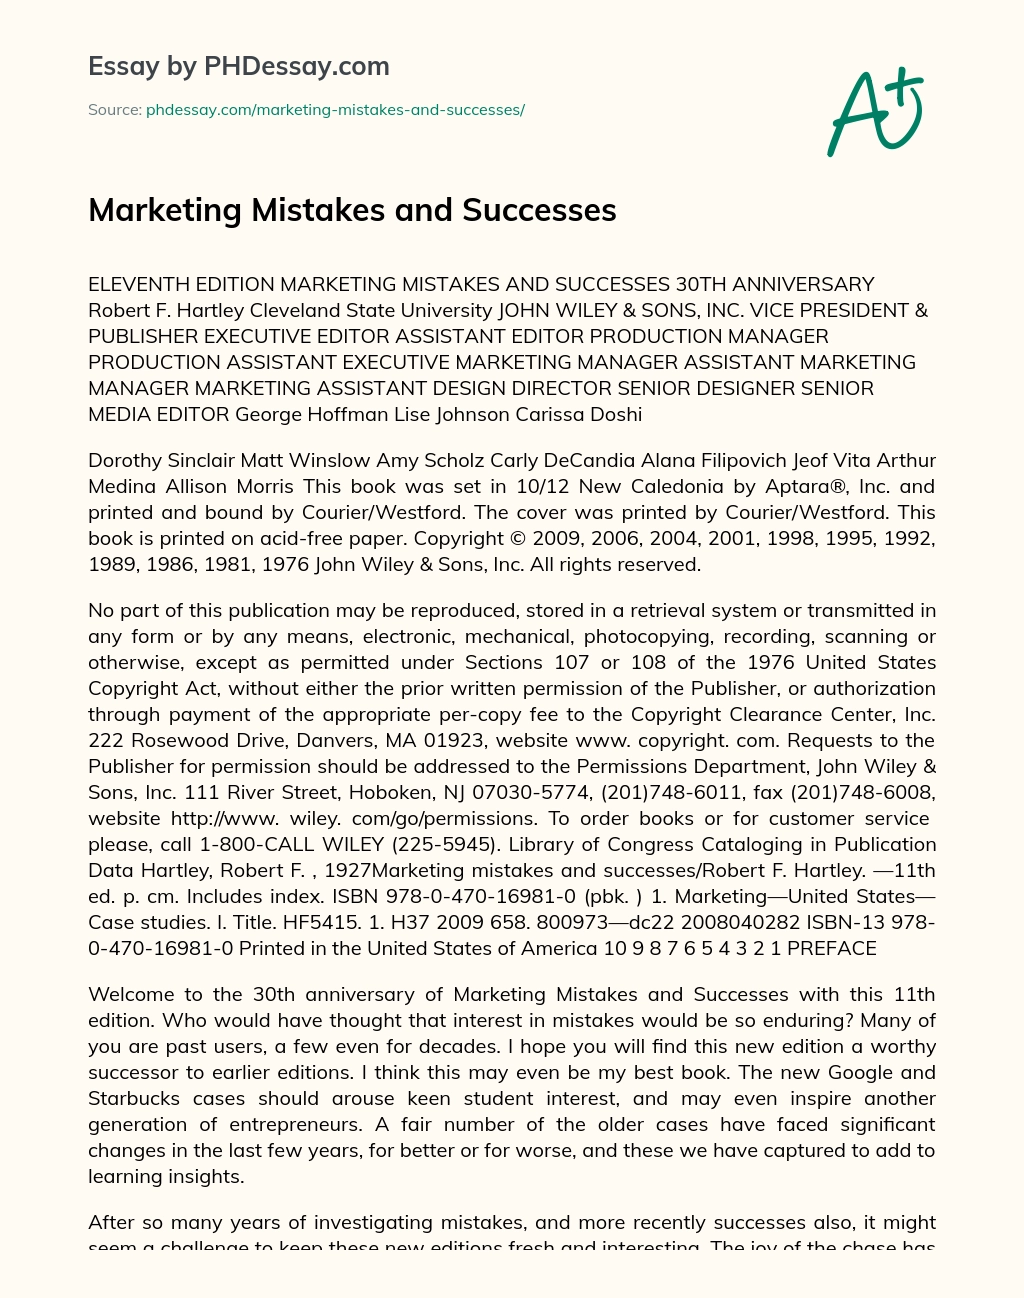 Marketing Mistakes and Successes essay